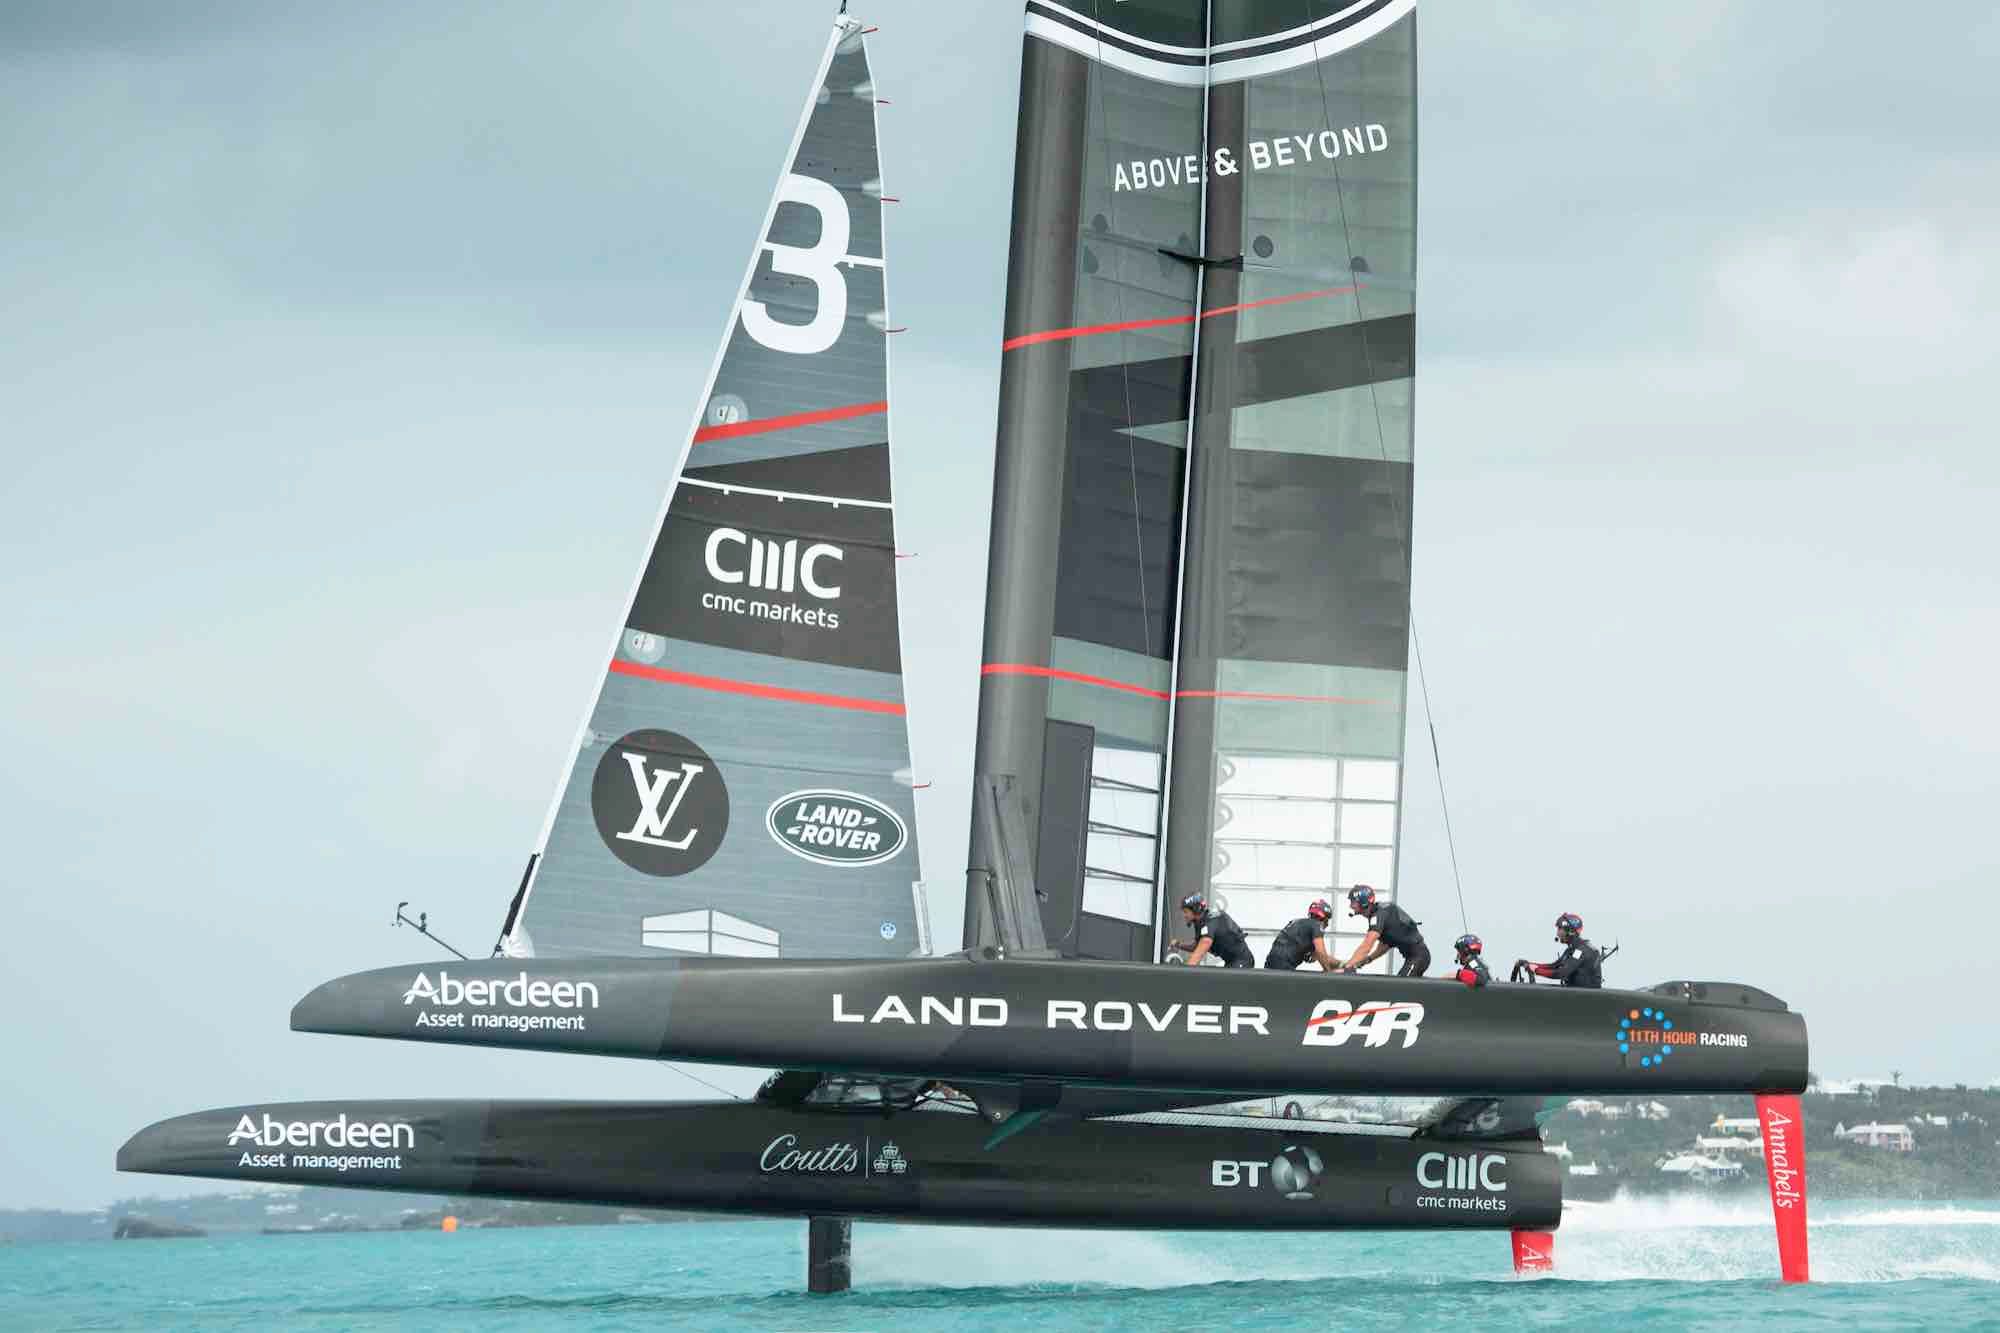 f1 on the water how ben ainslie and land rover bar plan to win the america s cup image 1